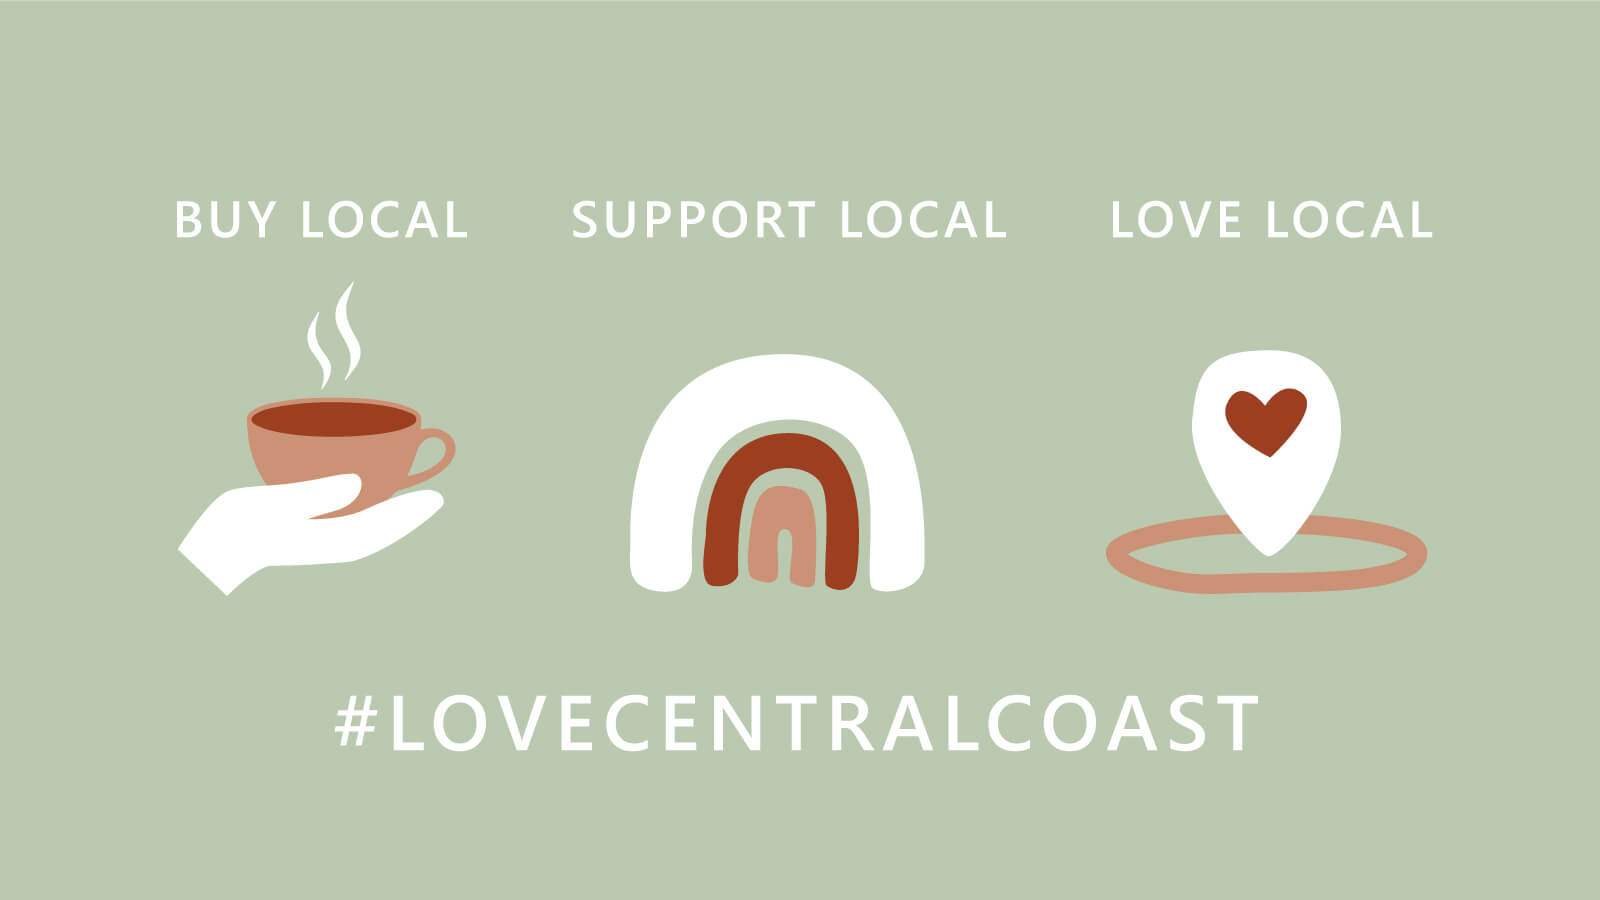 love local guide to explore and support local businesses